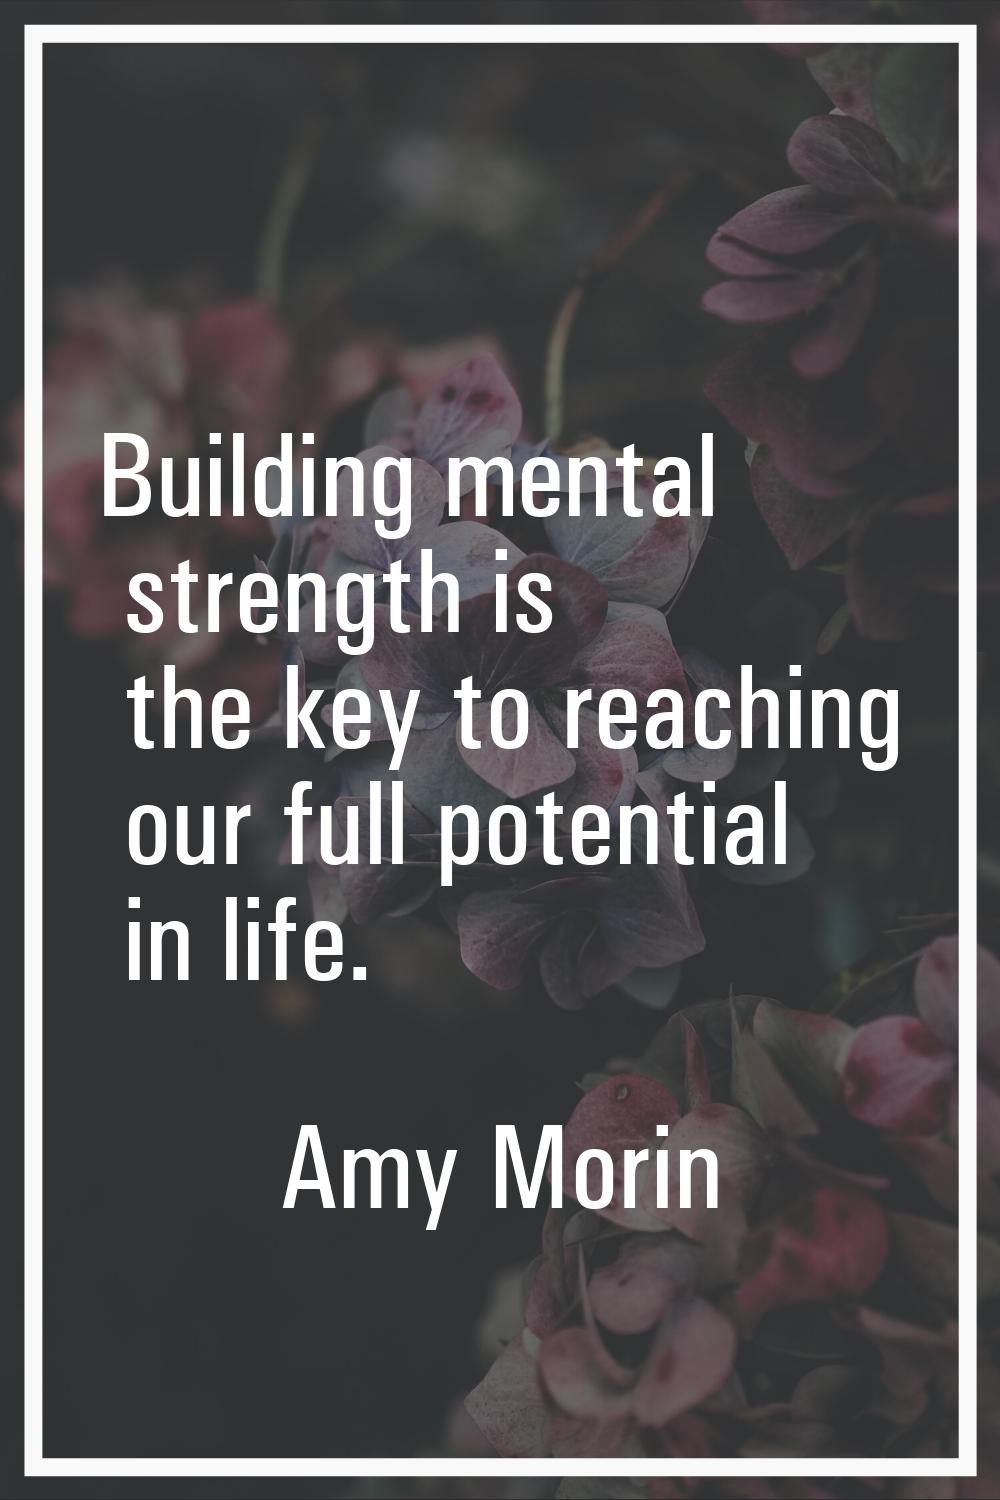 Building mental strength is the key to reaching our full potential in life.